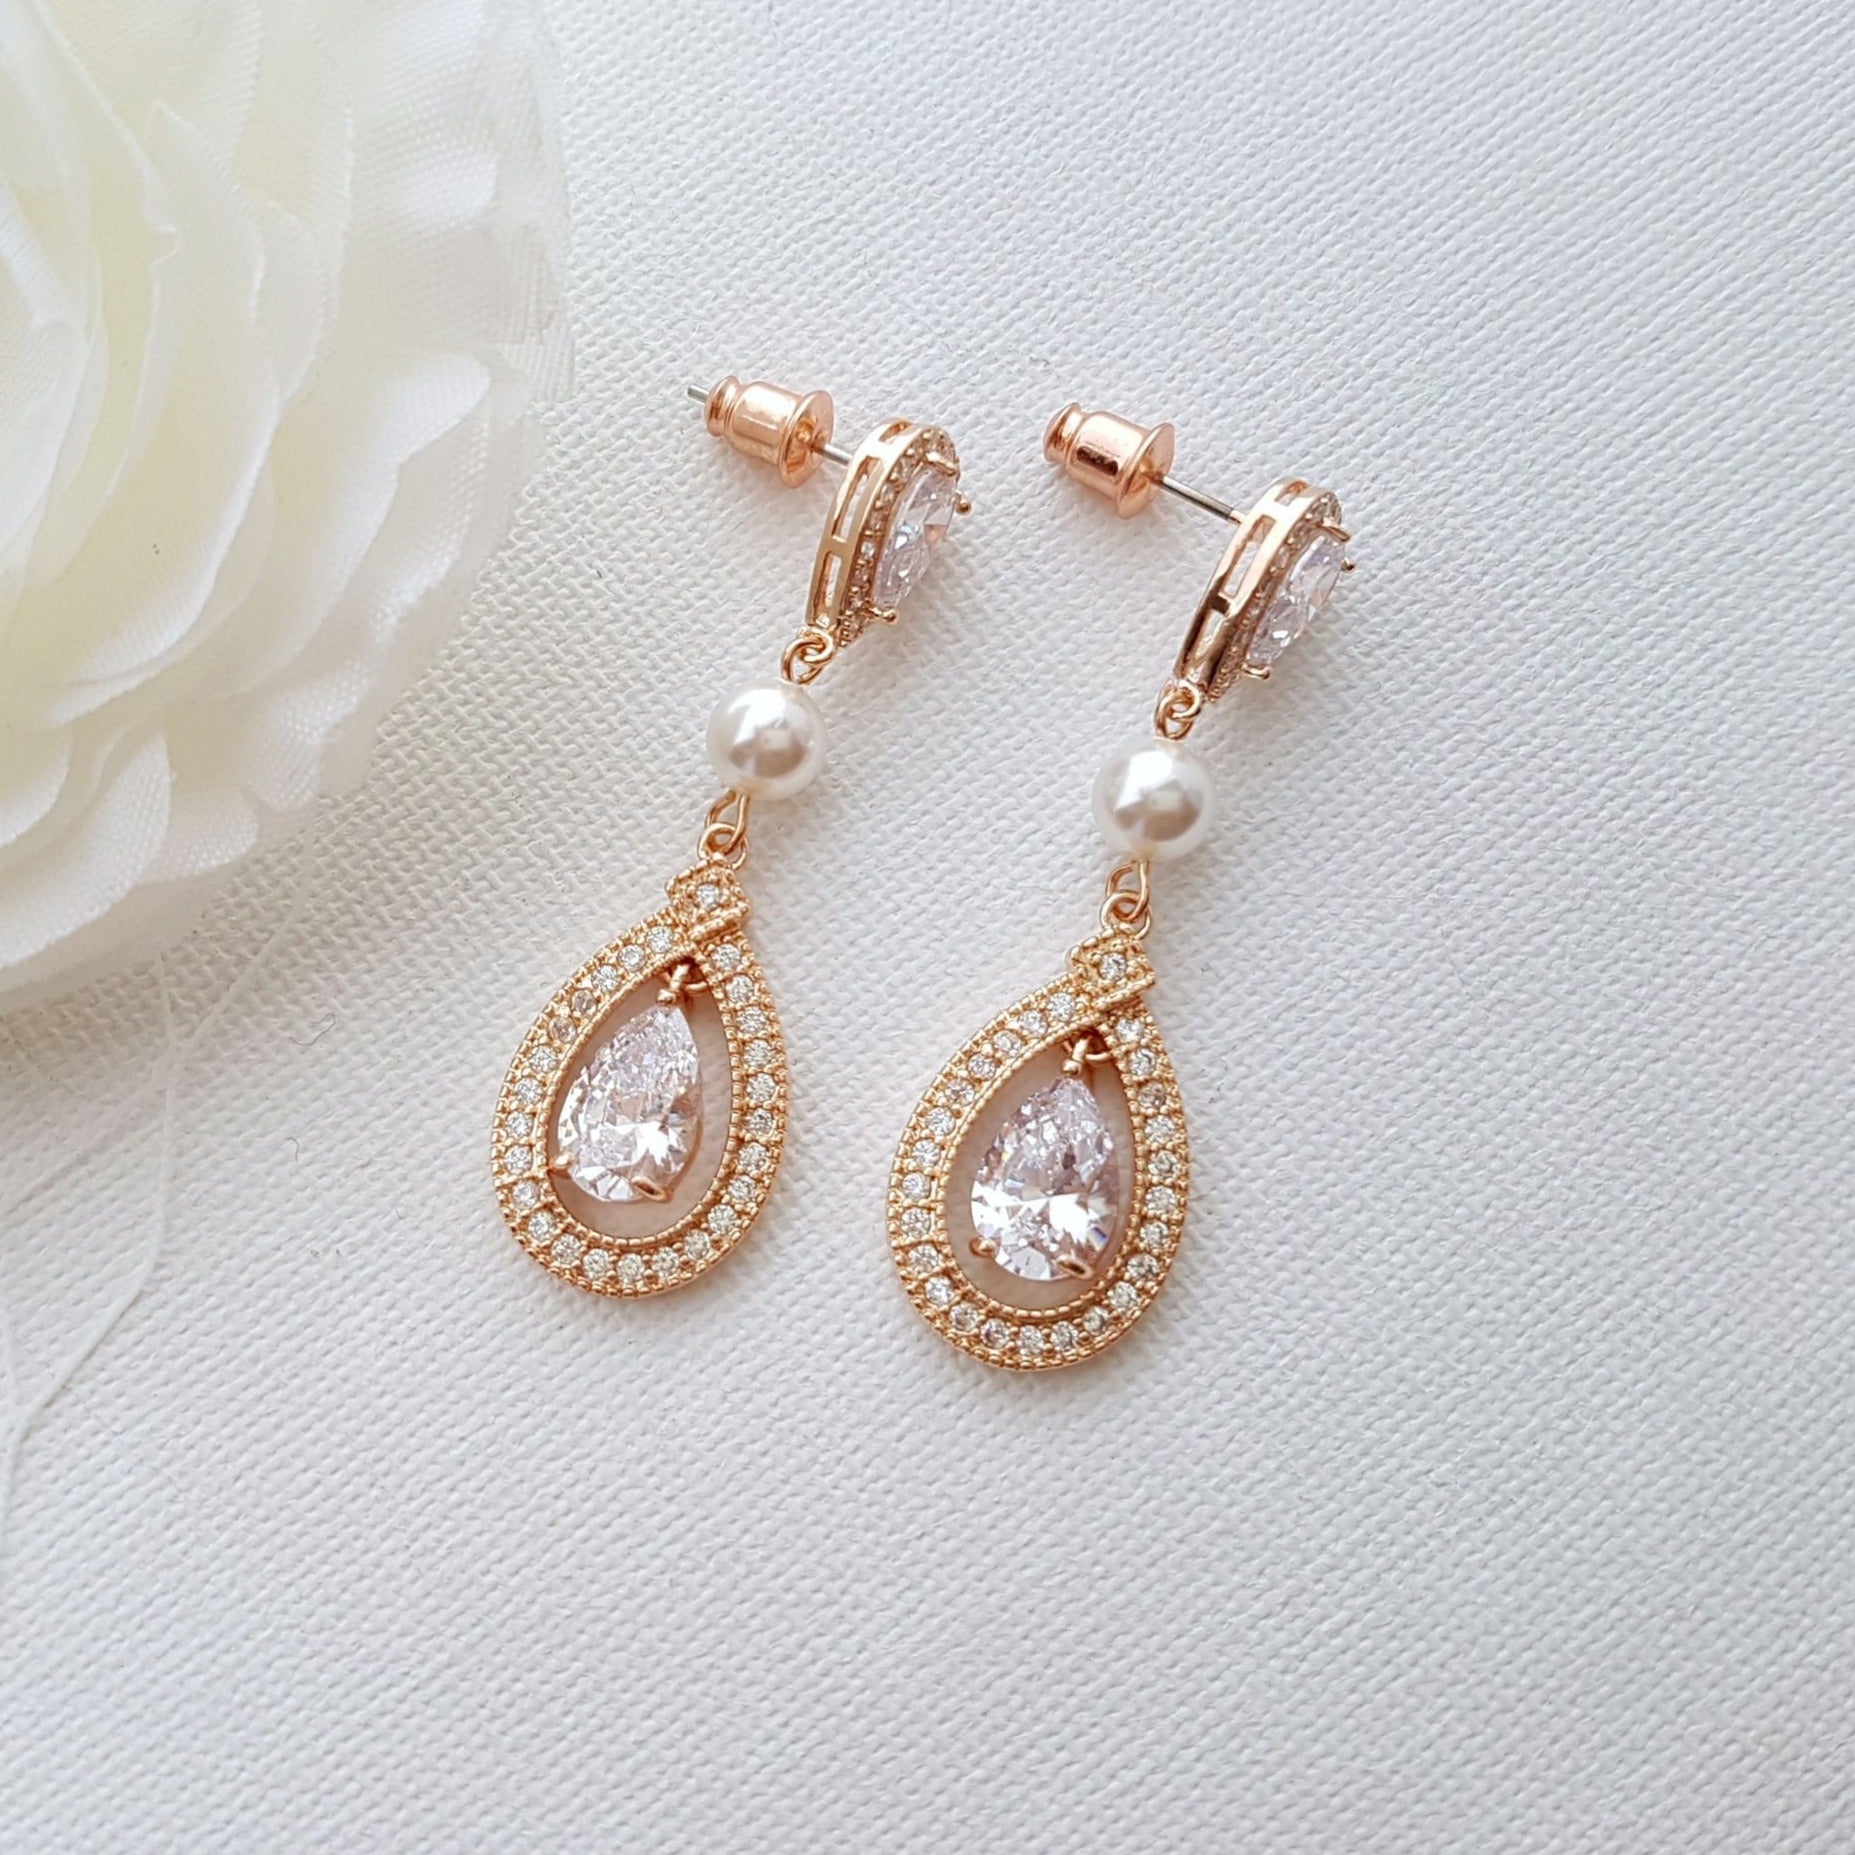 Rose Gold Earrings in Pearls & Cubic Zirconia for Brides- Poetry Designs